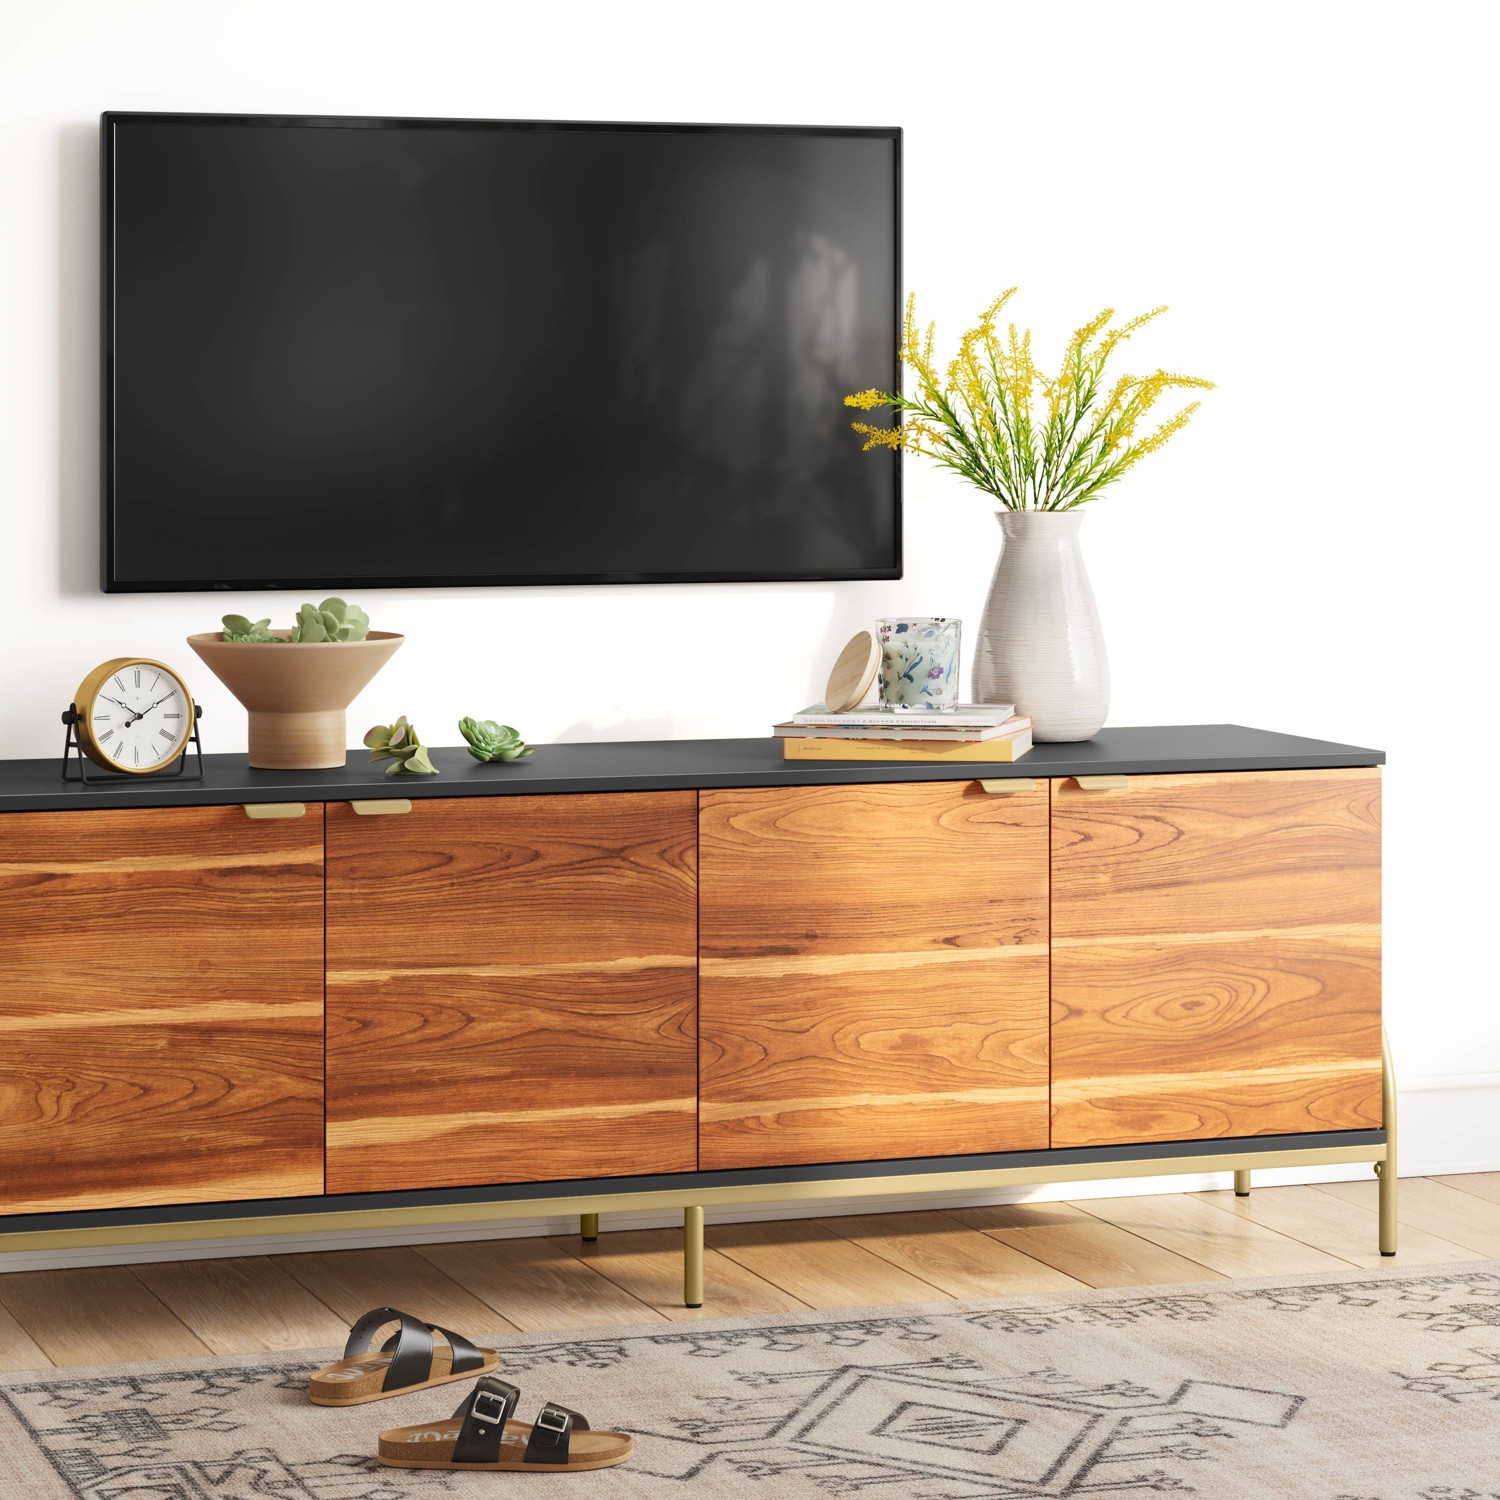 Summerville TV Stand for TVs up to 60" Brown - Threshold™ $225.00 When Purchased Online +Free shipping - Exclusions Apply at Target